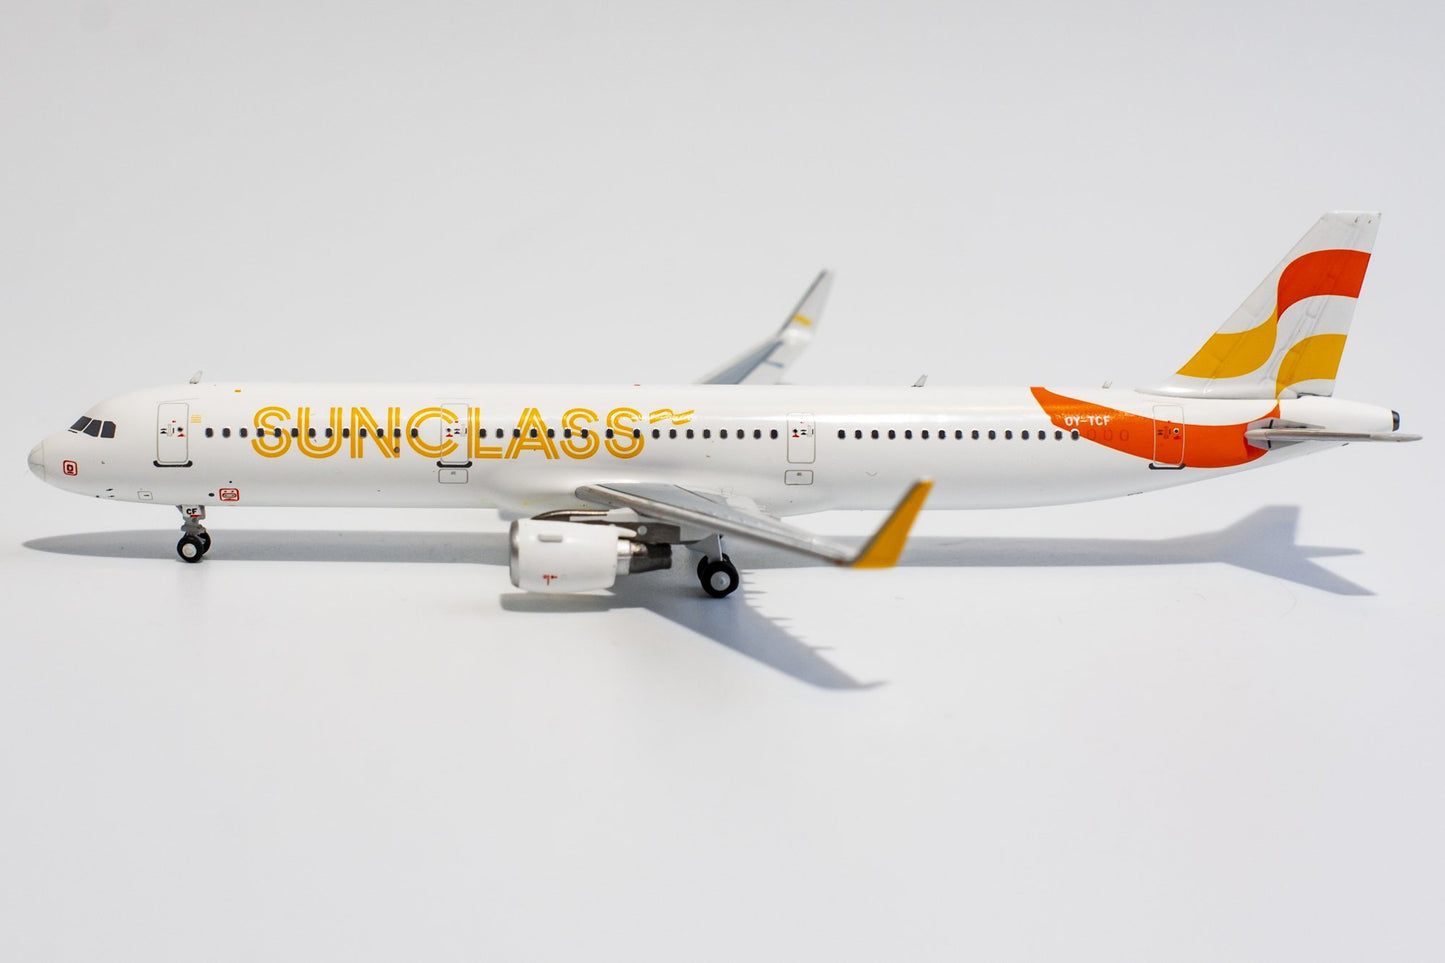 1/400 Sunclass Airlines A321 NG Models 13028 - Midwest Model Store